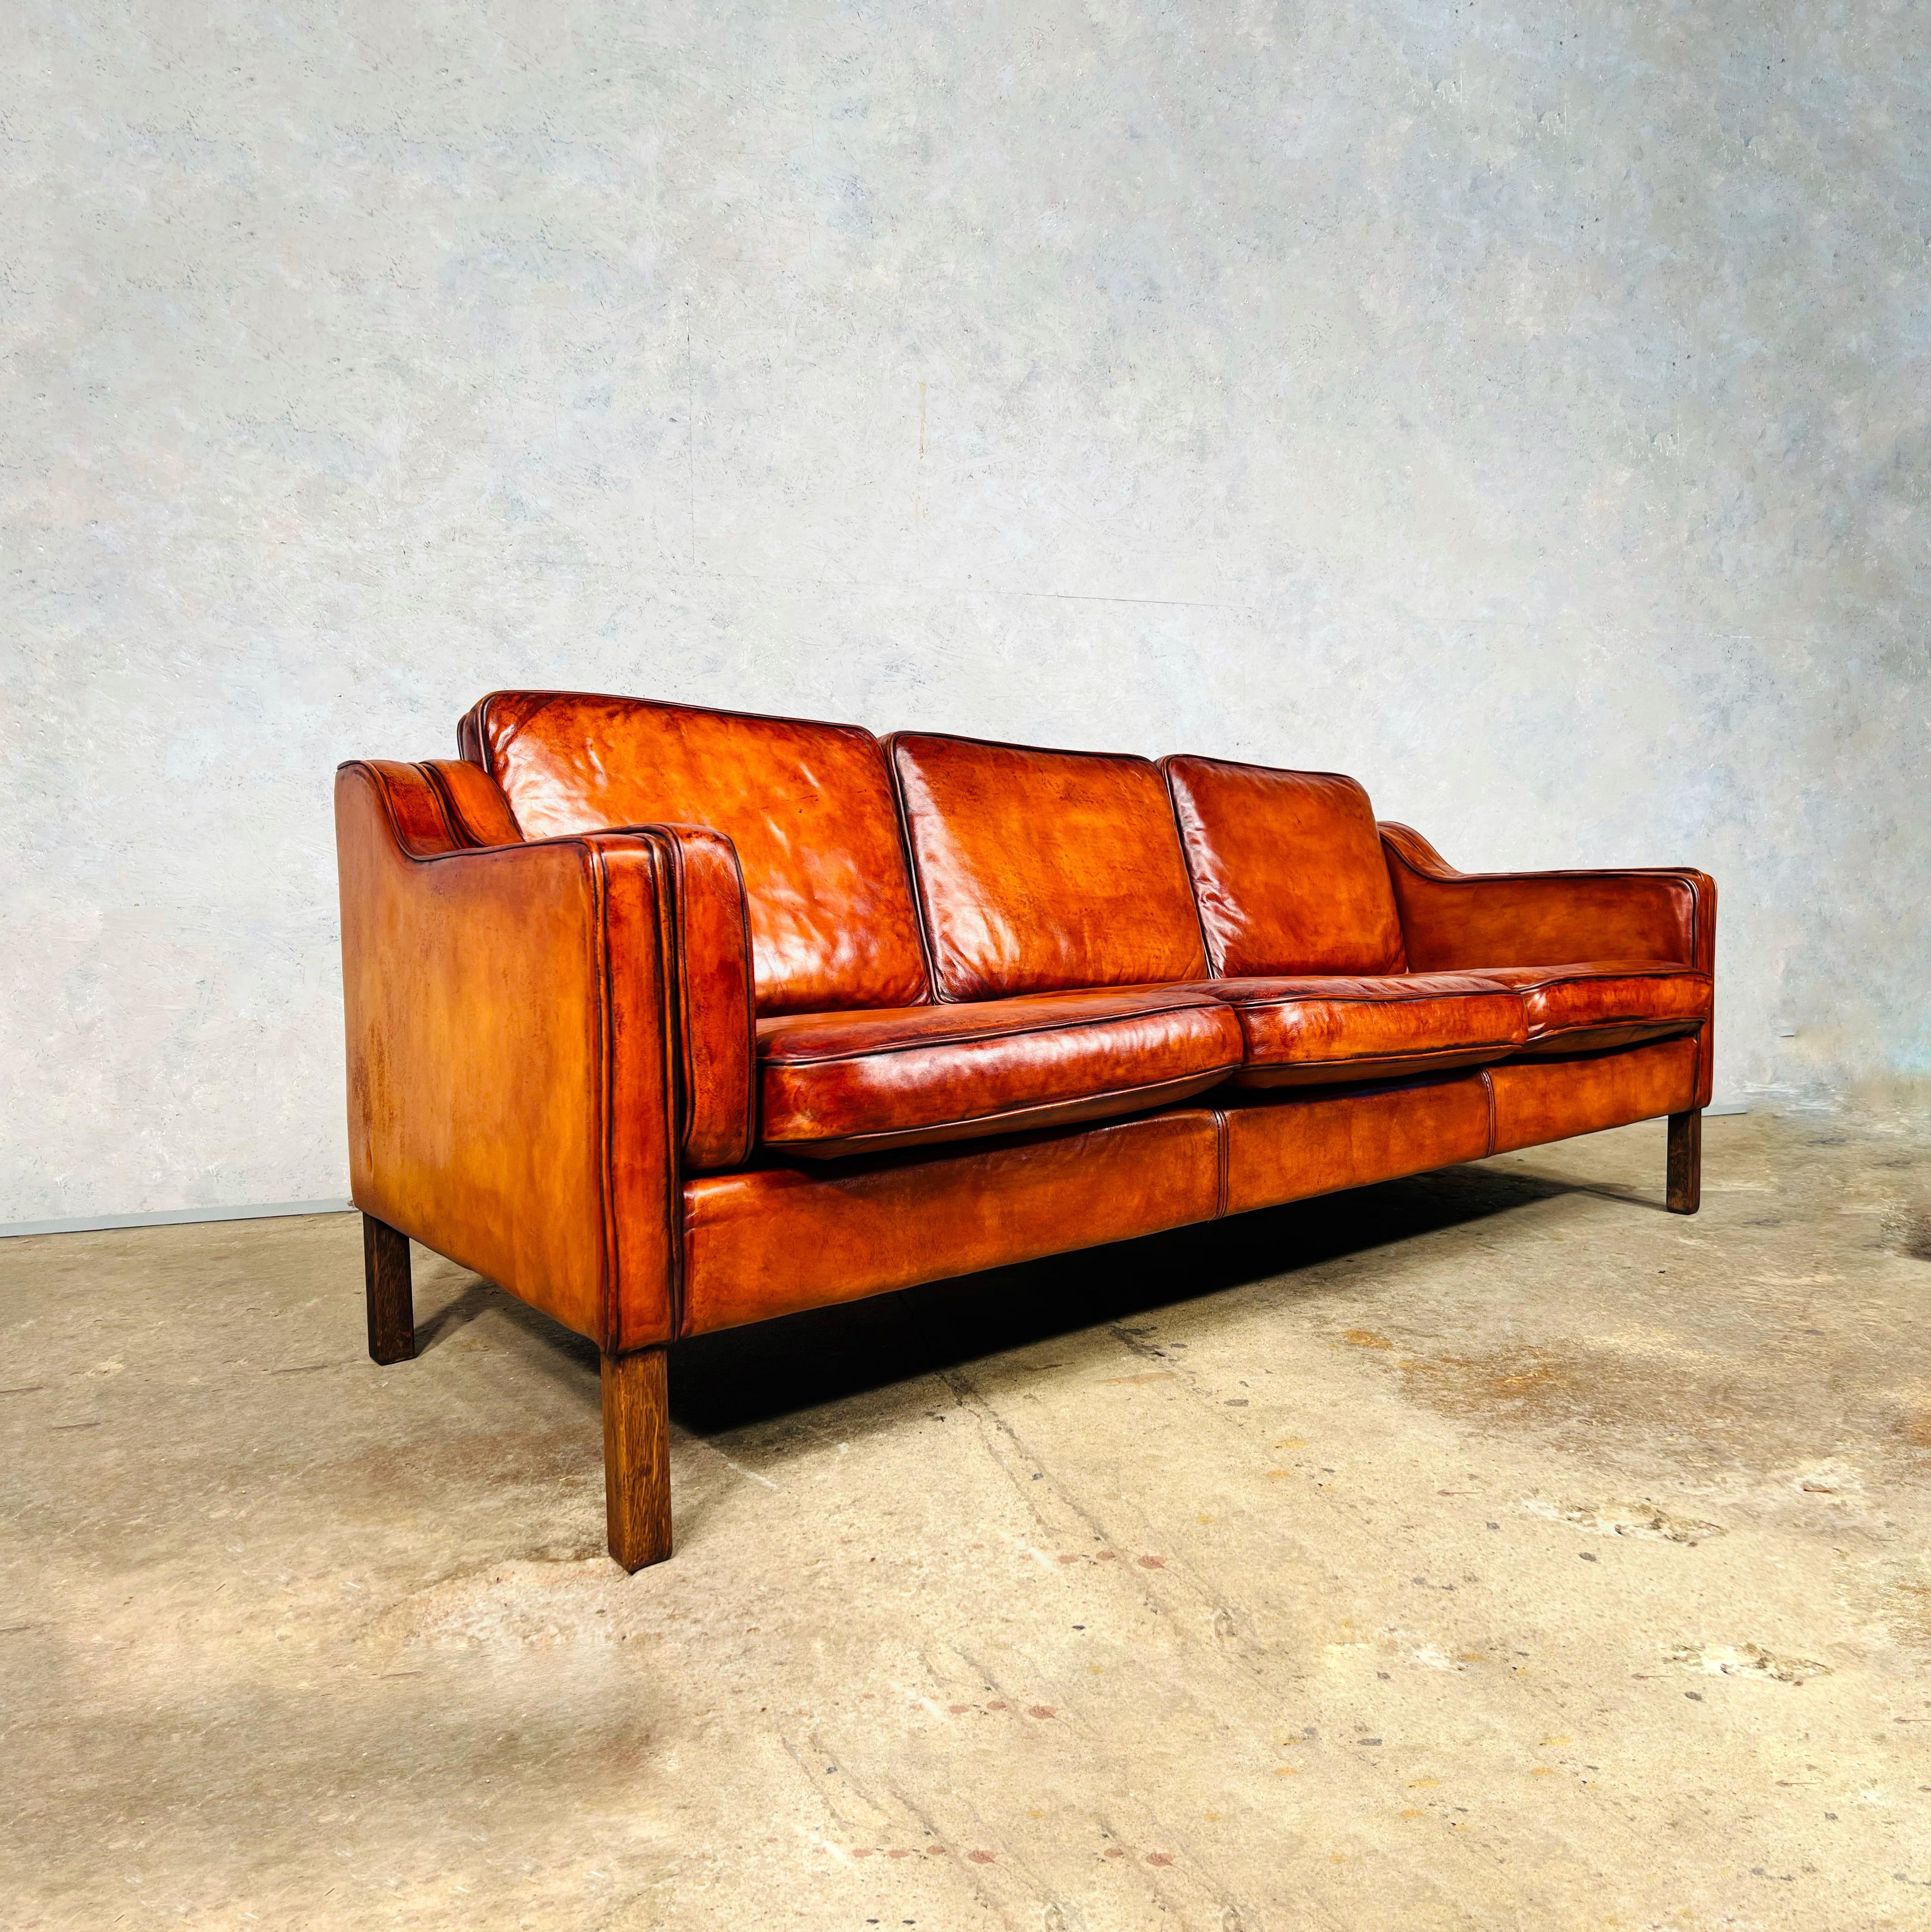 A very Stylish Vintage 1970 s sofa by Svend Skipper, great quality with thick pipping around the cushions. The Leather is a wonderful patinated cognac colour. Great design, sits beautifully, deep seated and very comfortable to sit in with feather